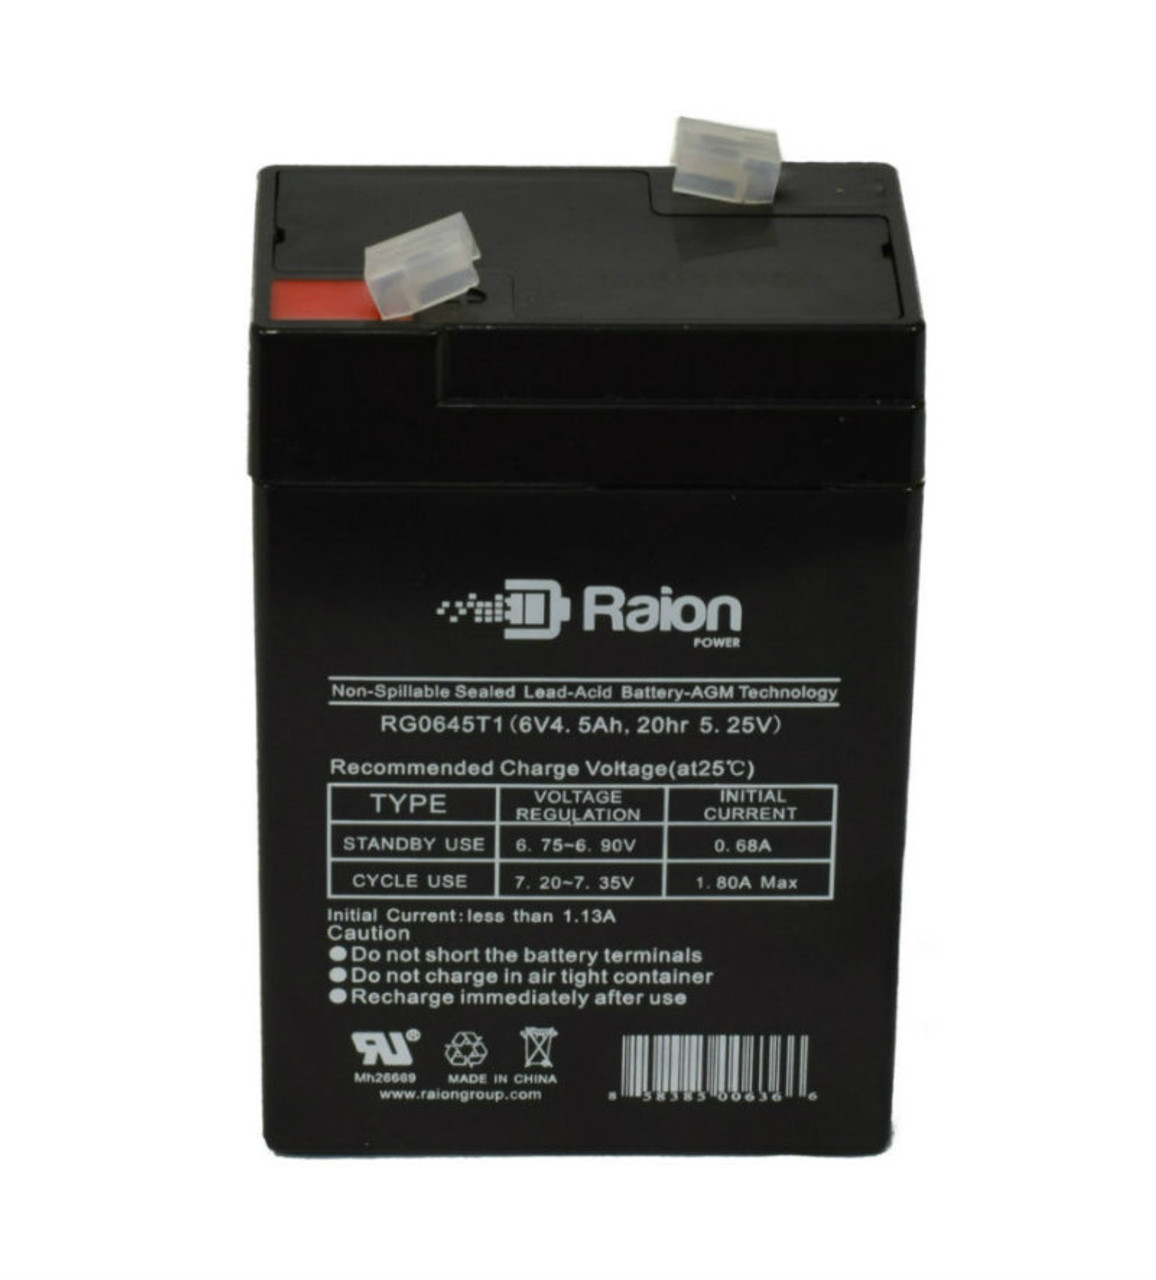 Raion Power RG0645T1 Replacement Battery Cartridge for Dual-Lite HCXUGWRC12